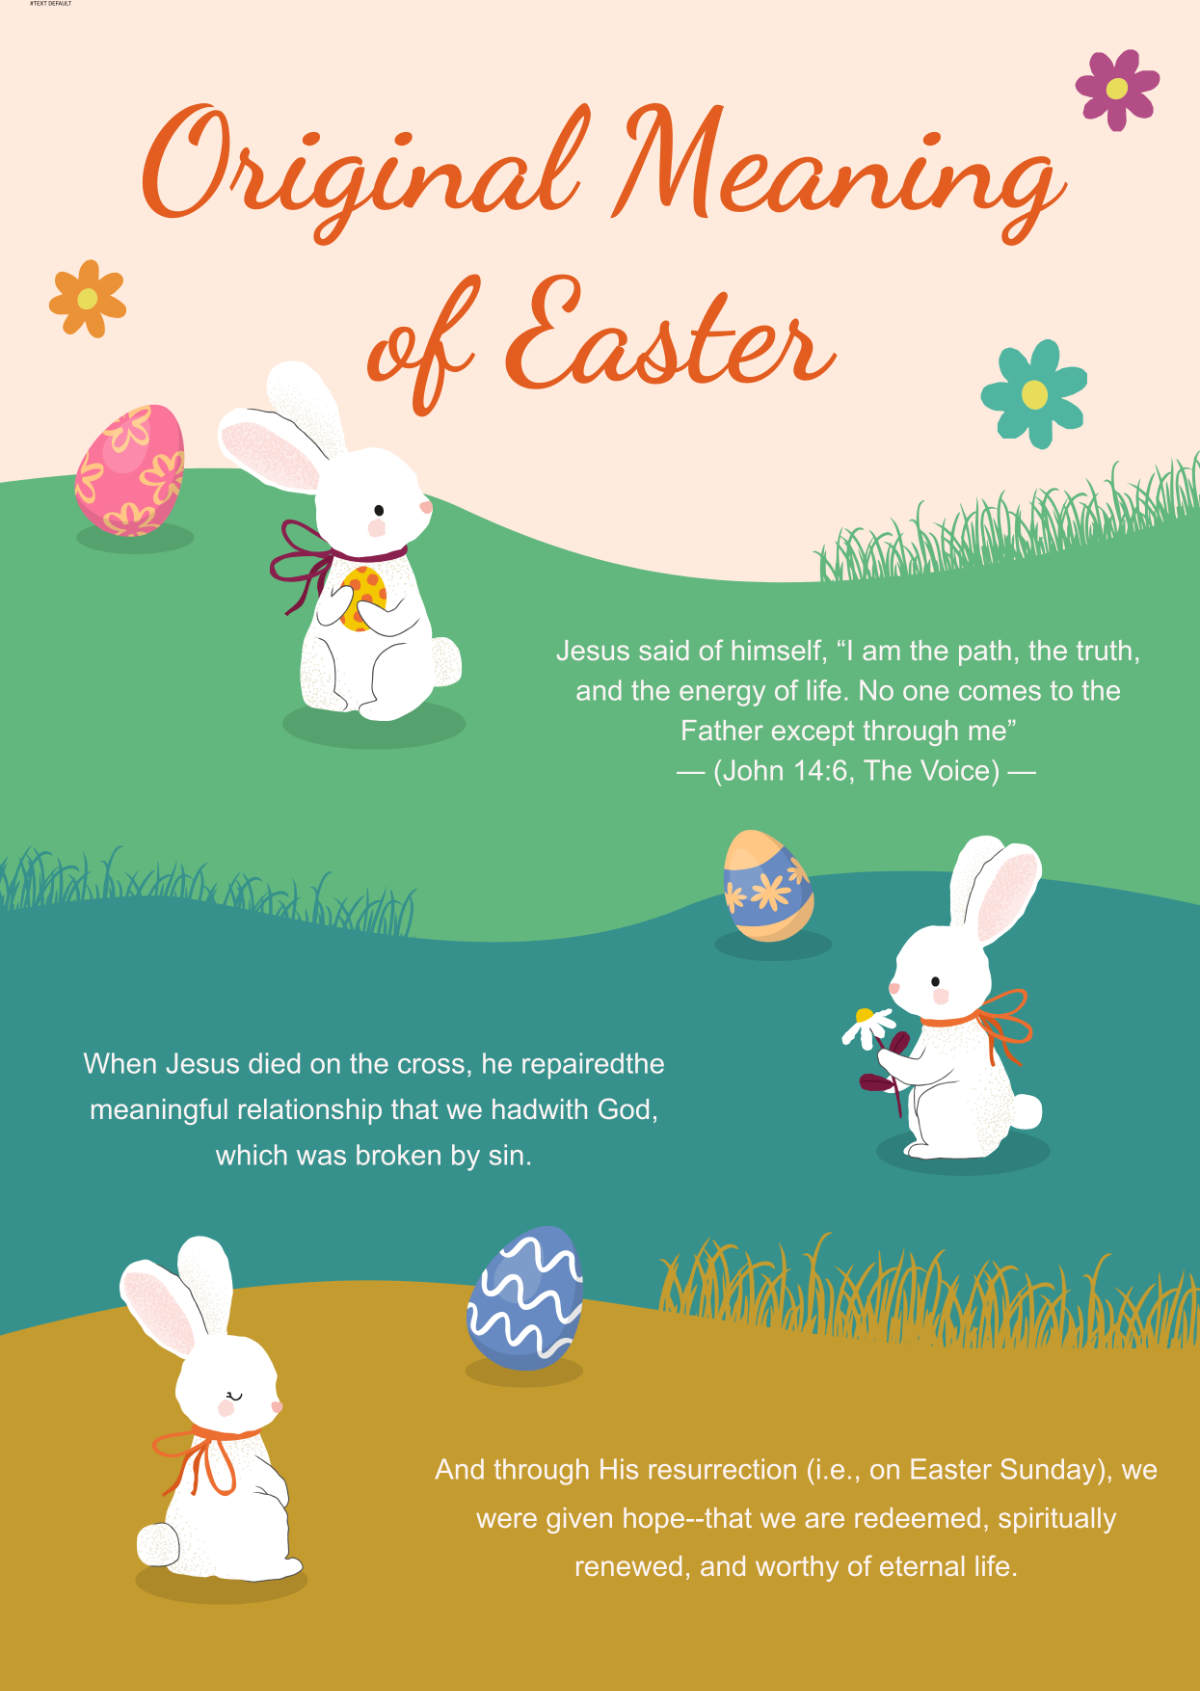 Free Orginal Meaning of Easter Template